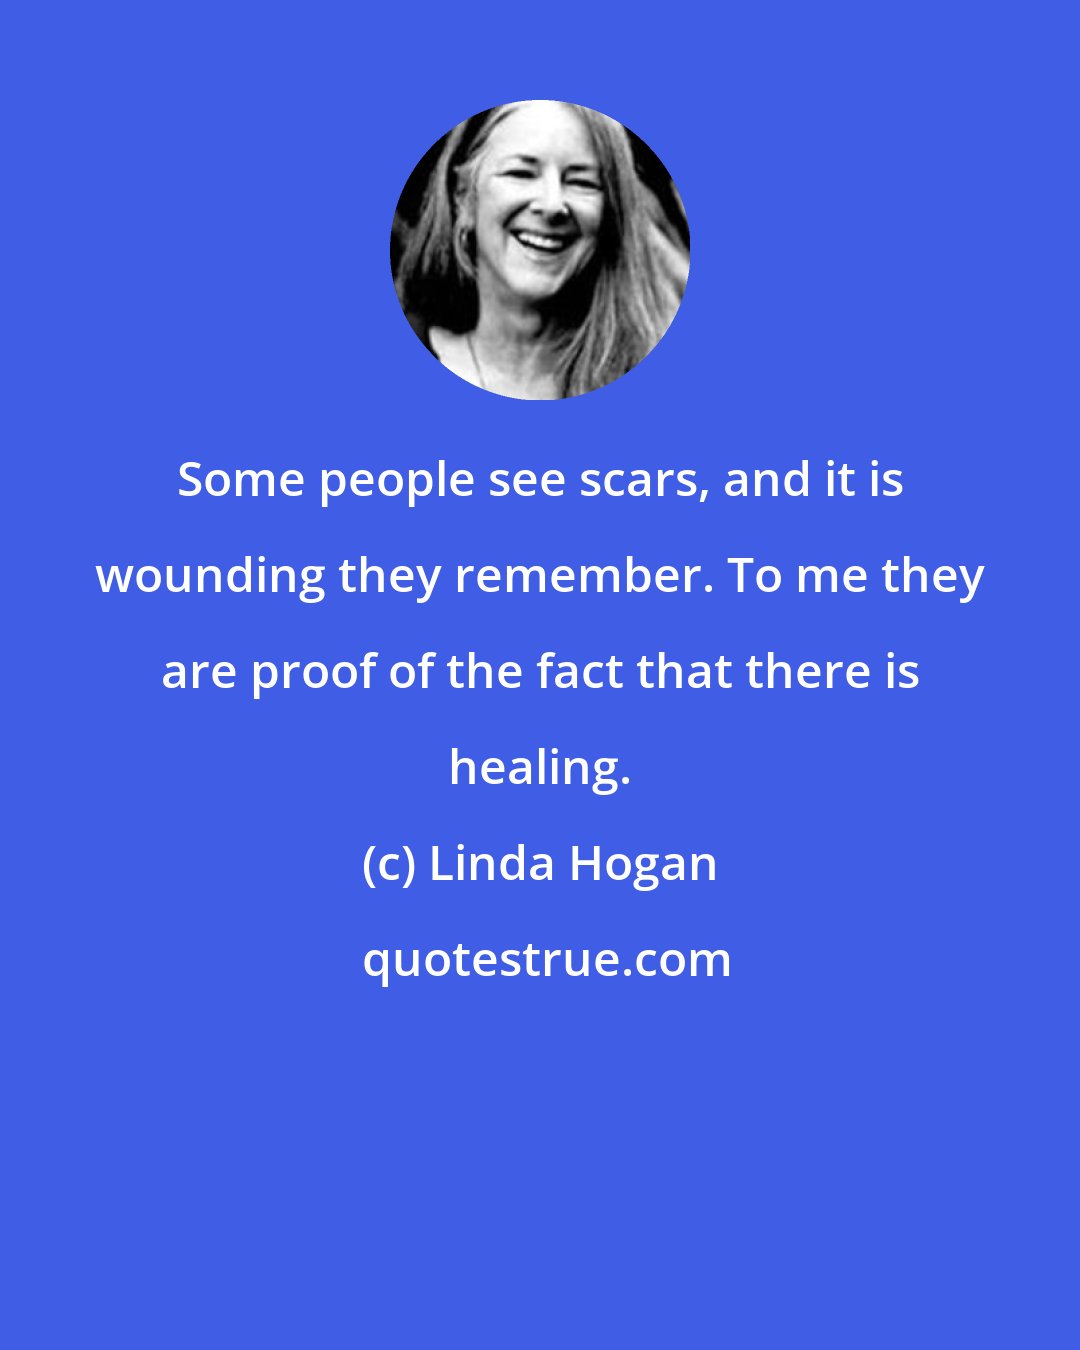 Linda Hogan: Some people see scars, and it is wounding they remember. To me they are proof of the fact that there is healing.